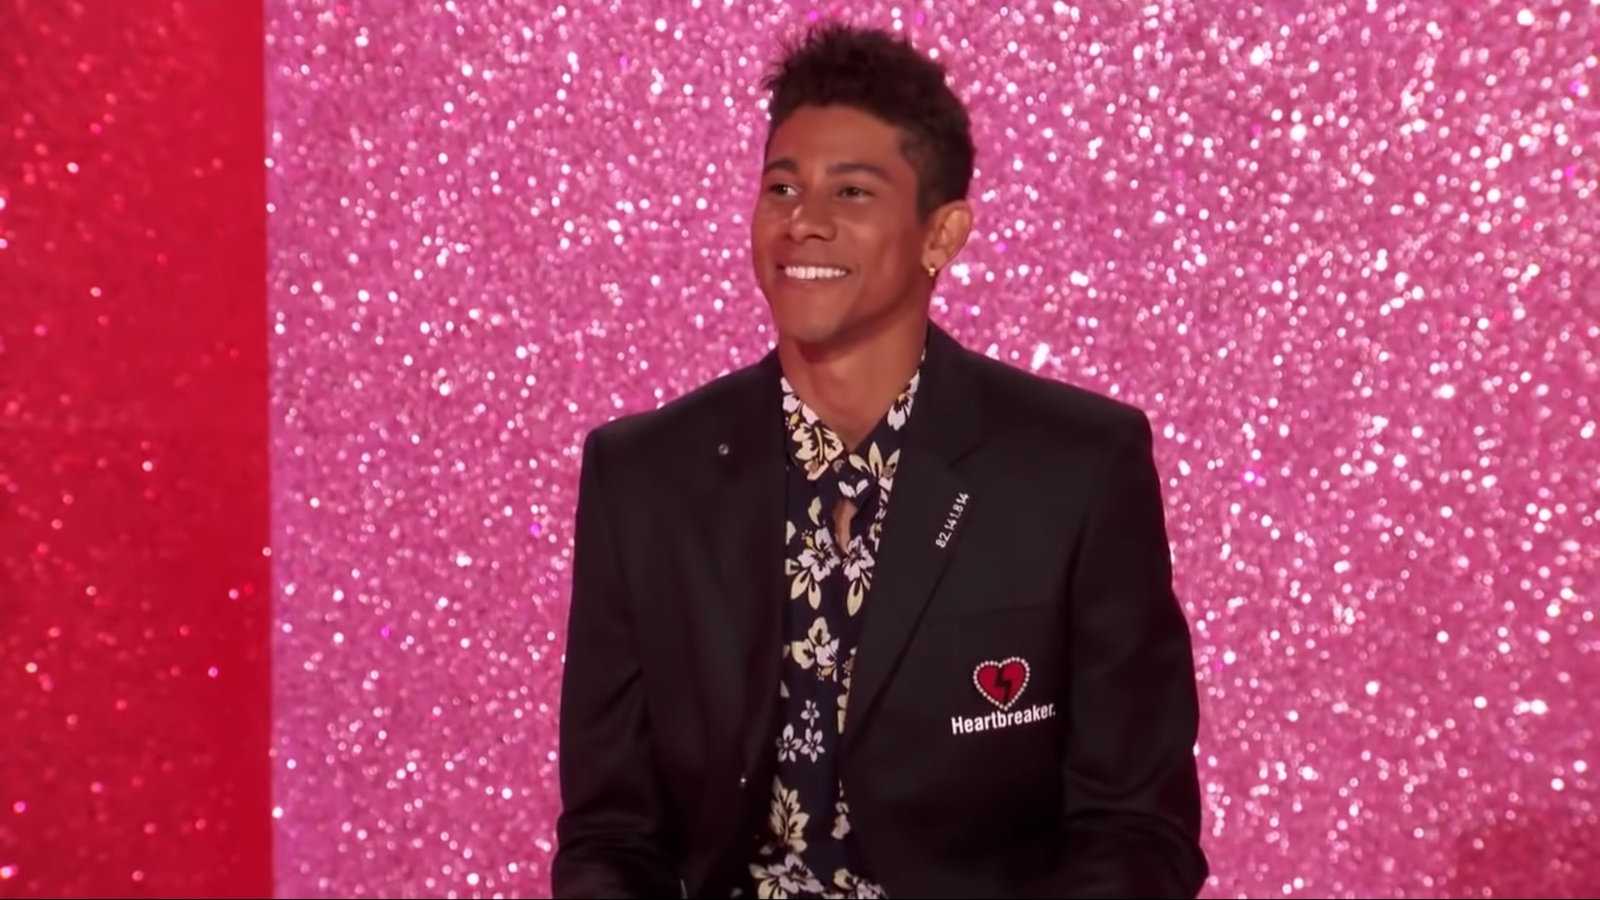 Keiynan Lonsdale is an Australian-Nigerian actor who absolutely melted hearts in the film "Love, Simon"